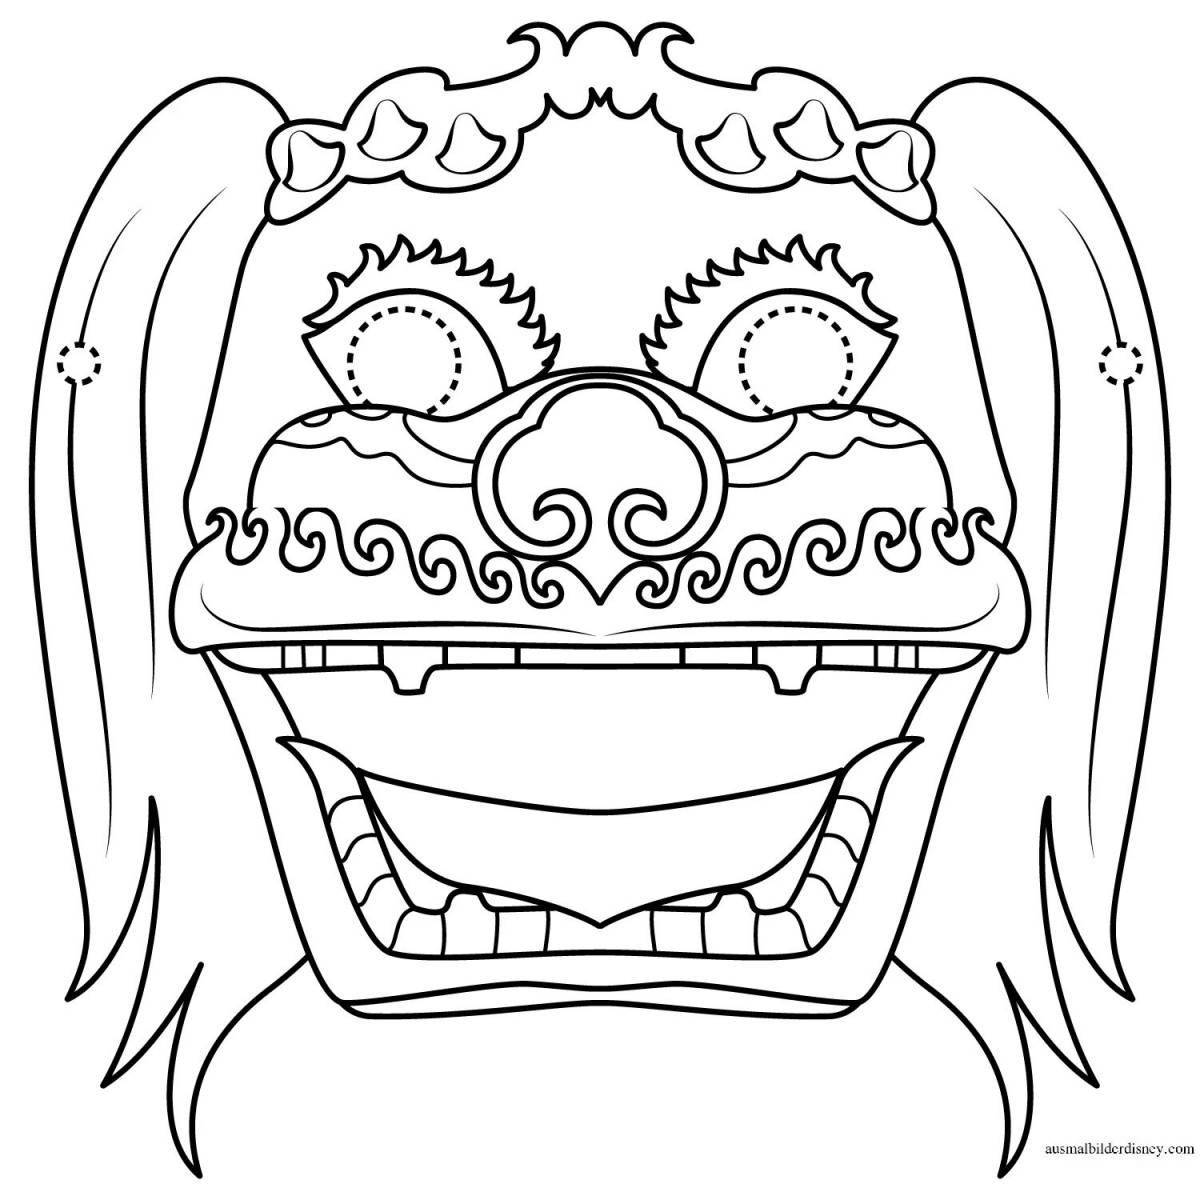 Coloring page ice cream mask filled with joy